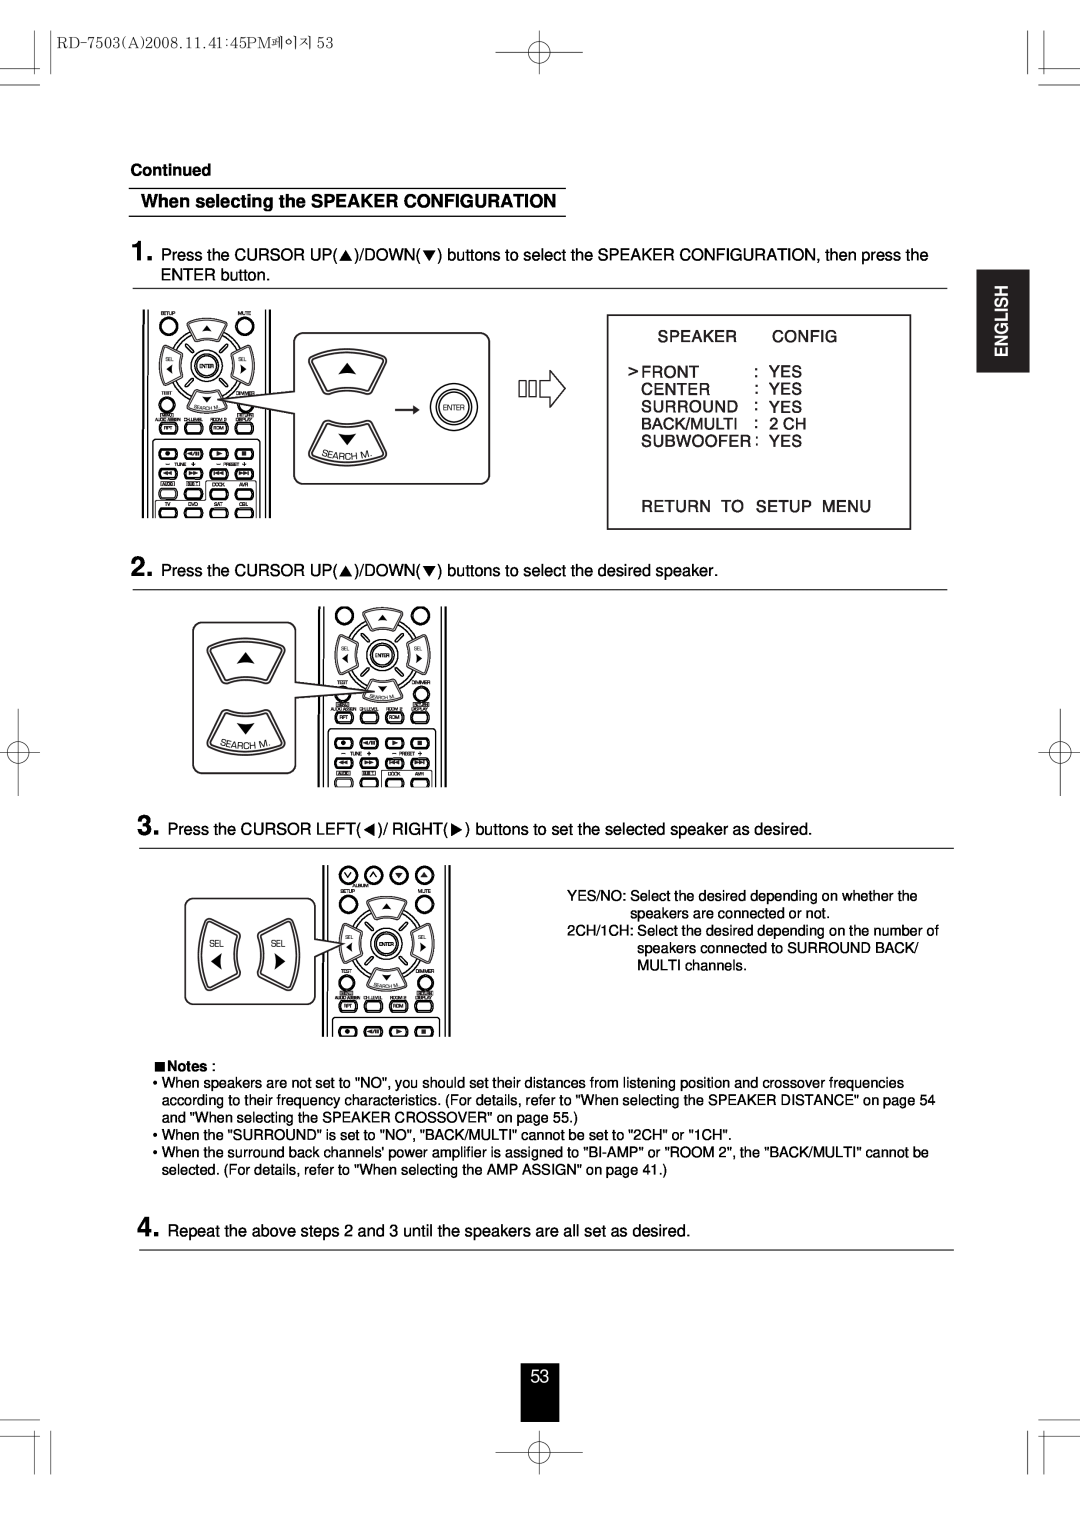 Sherwood RD-7503 manual When selecting the SPEAKER CONFIGURATION, Continued, English 